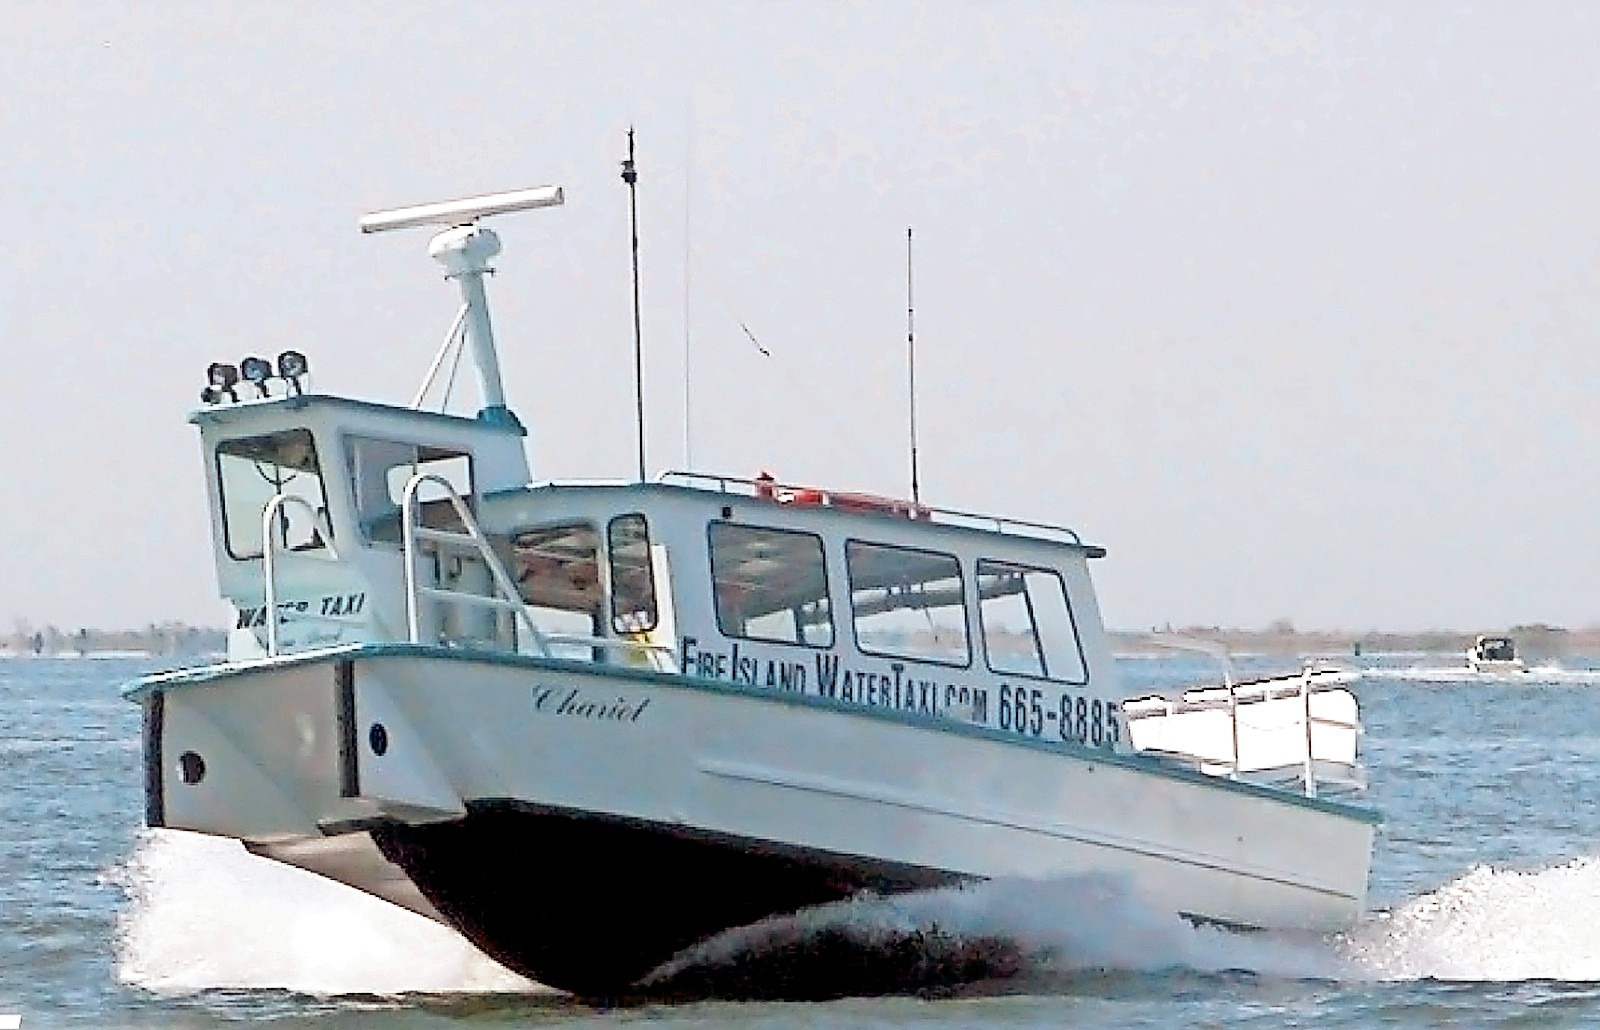 Sunset Bay is looking to partner with Fire Island Water Taxi, and would also run charter boats.